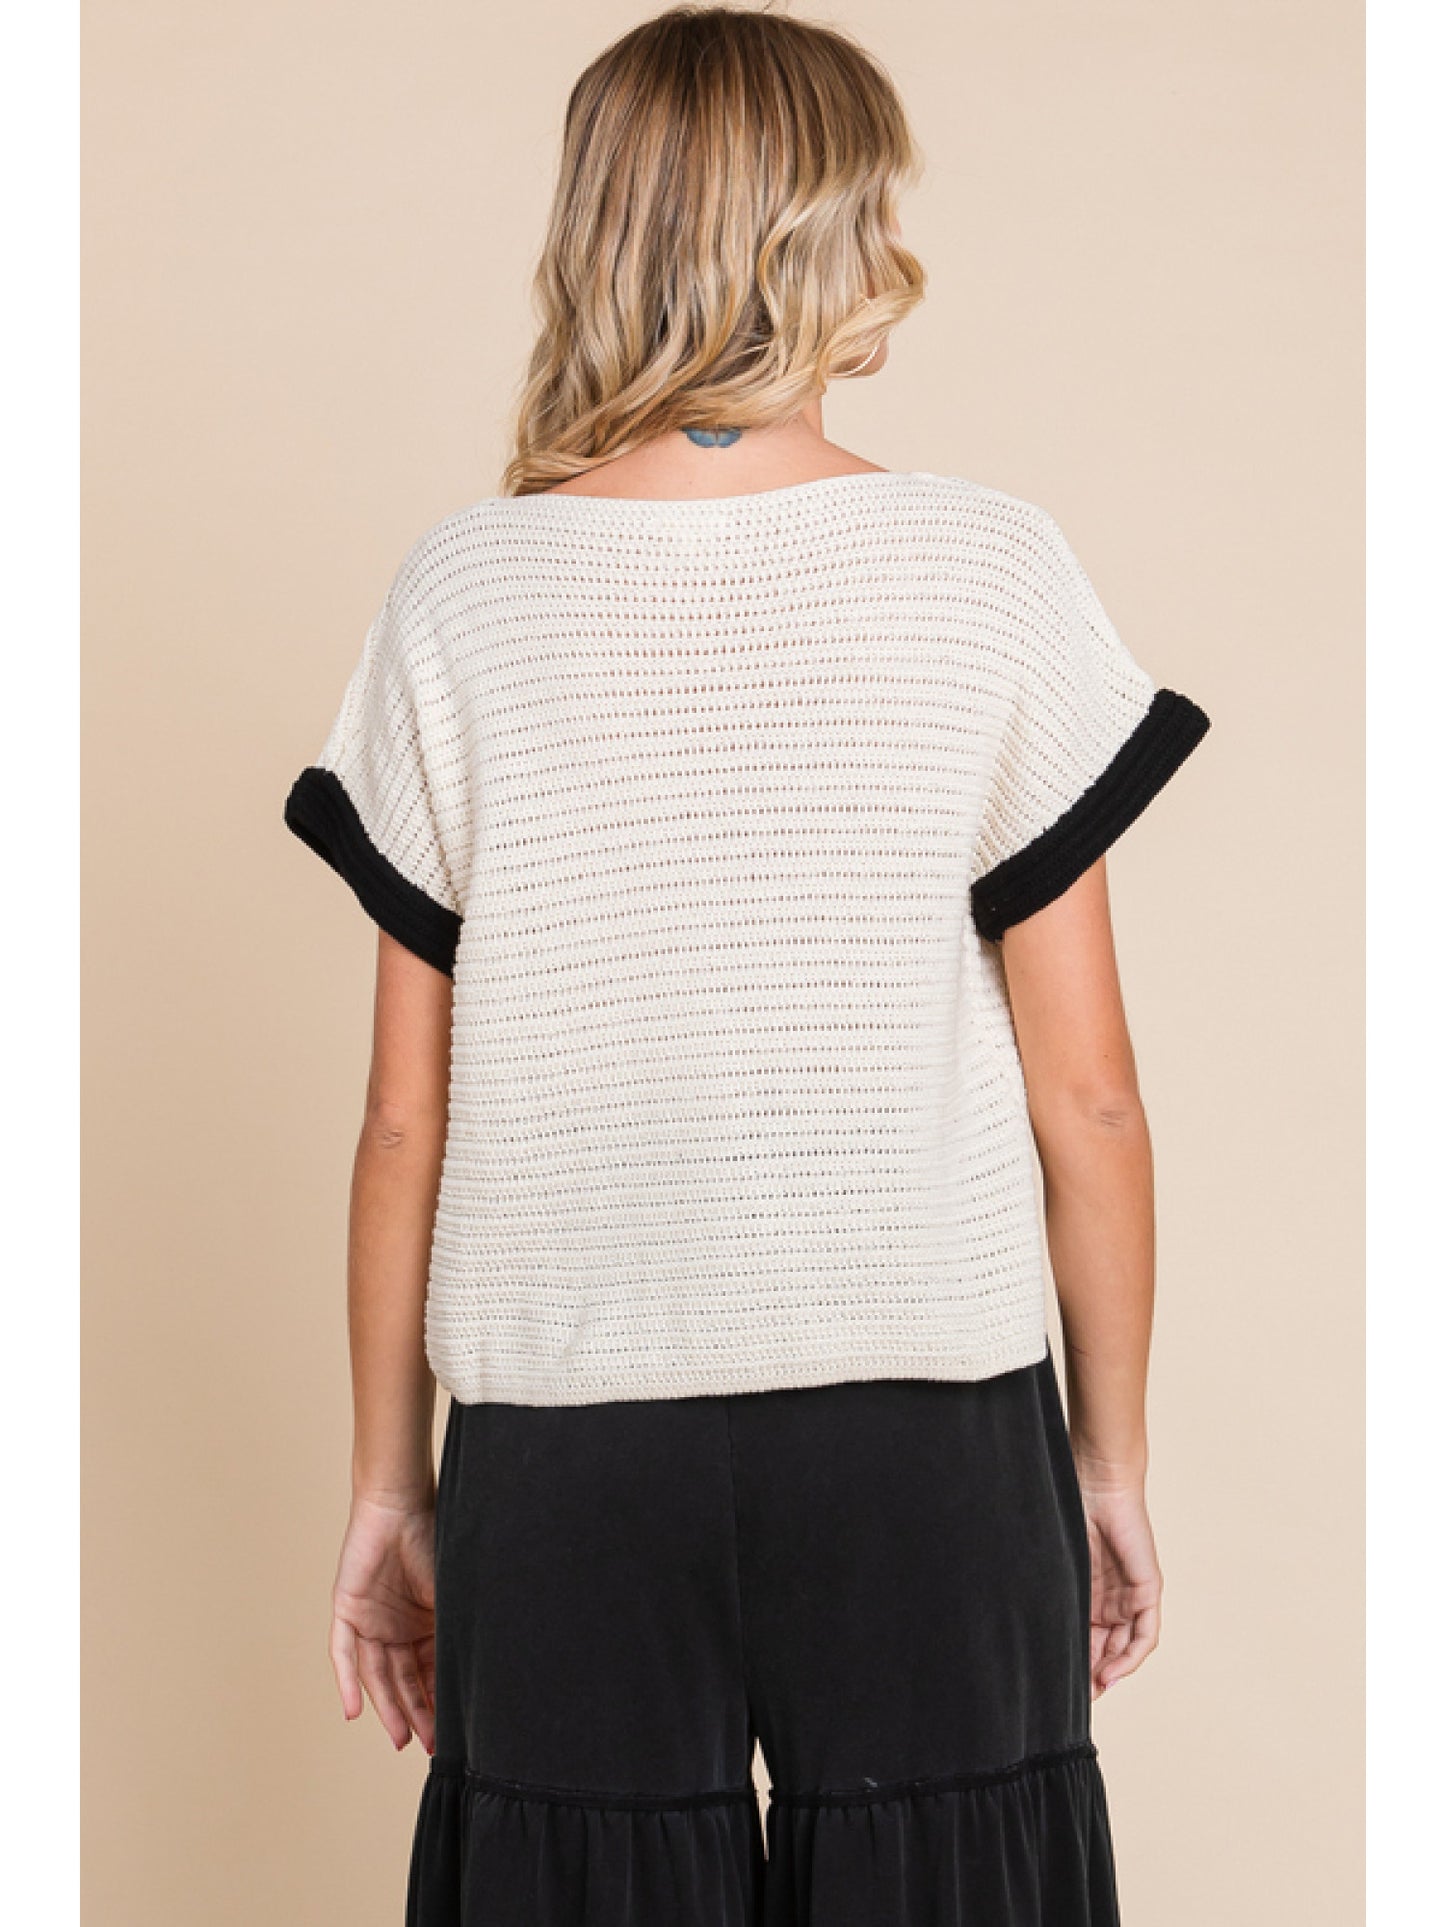 The Hannah Black and White lightweight sweater top